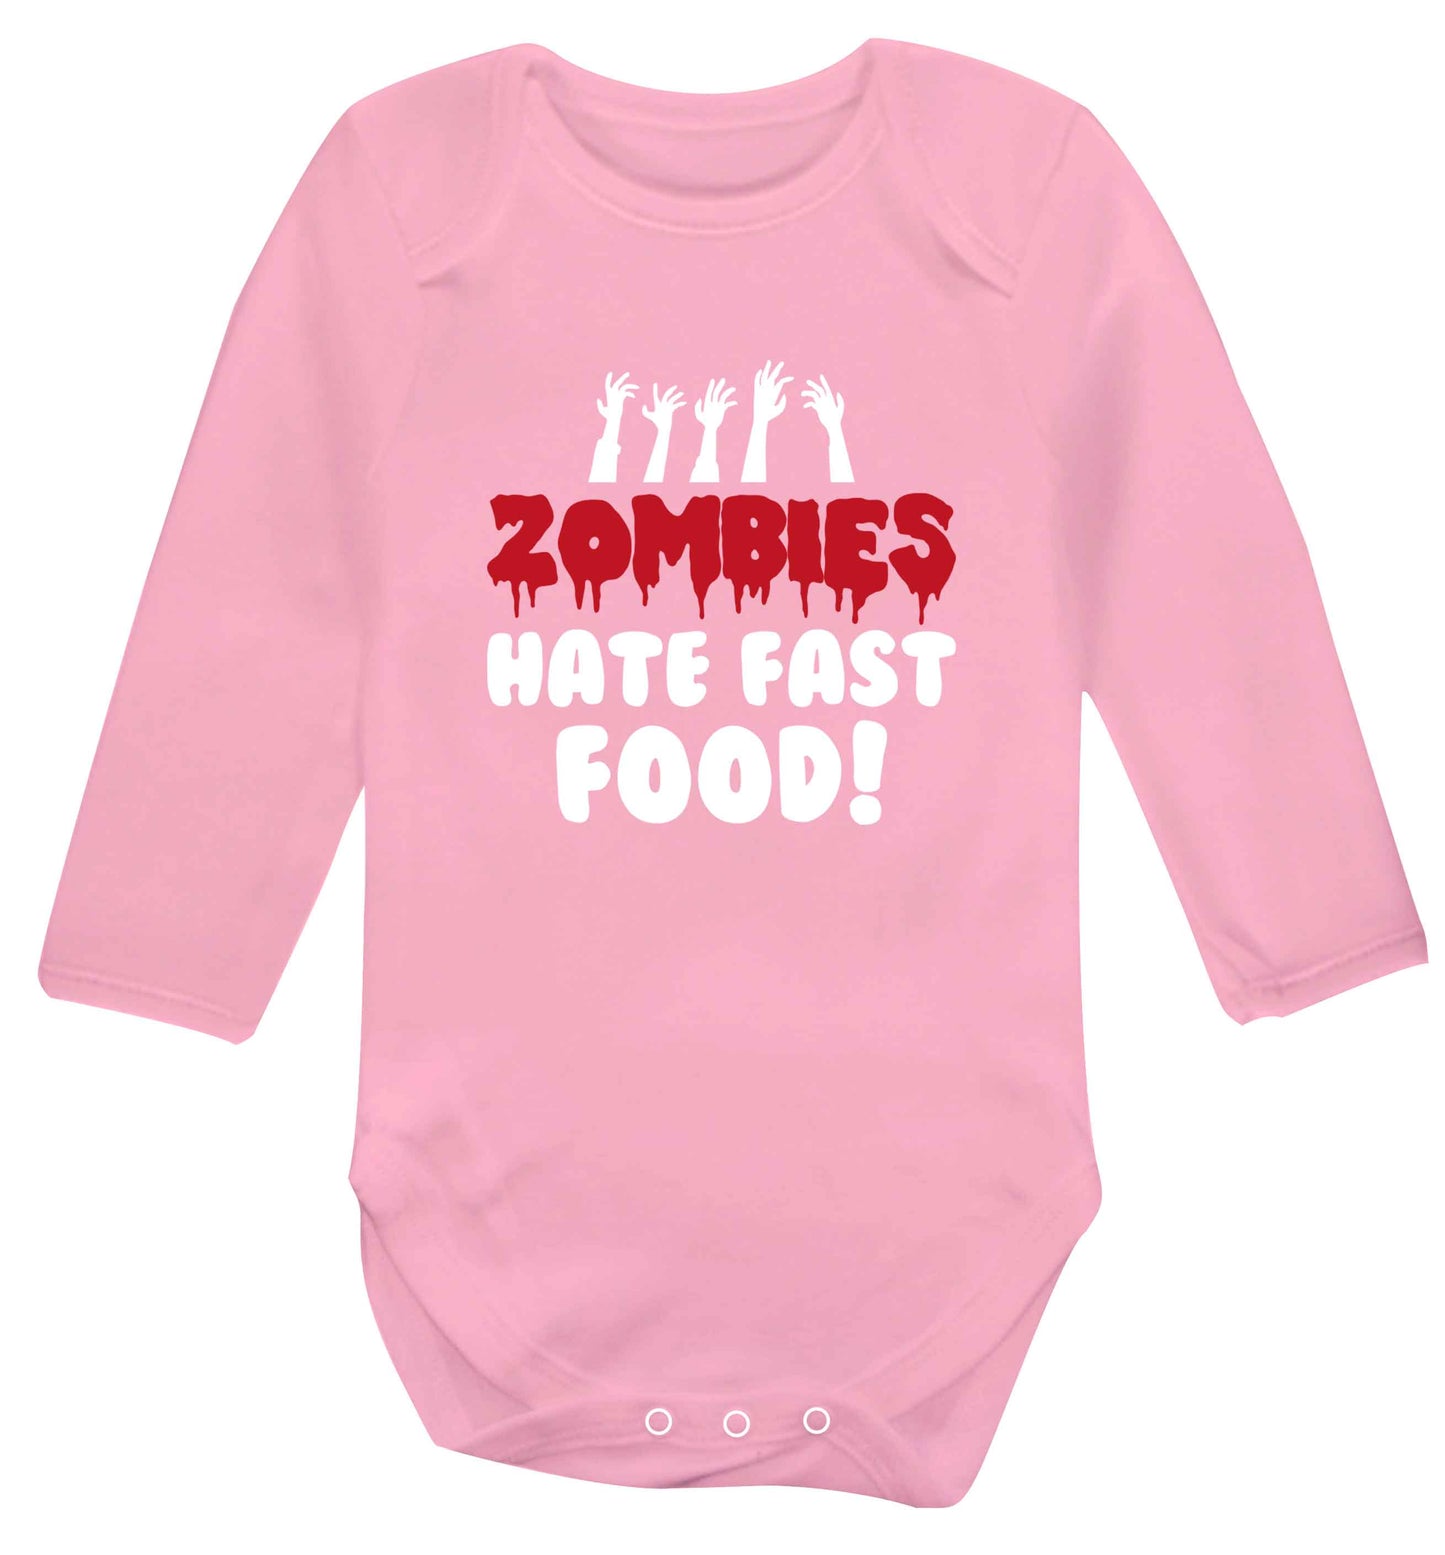 Zombies hate fast food baby vest long sleeved pale pink 6-12 months